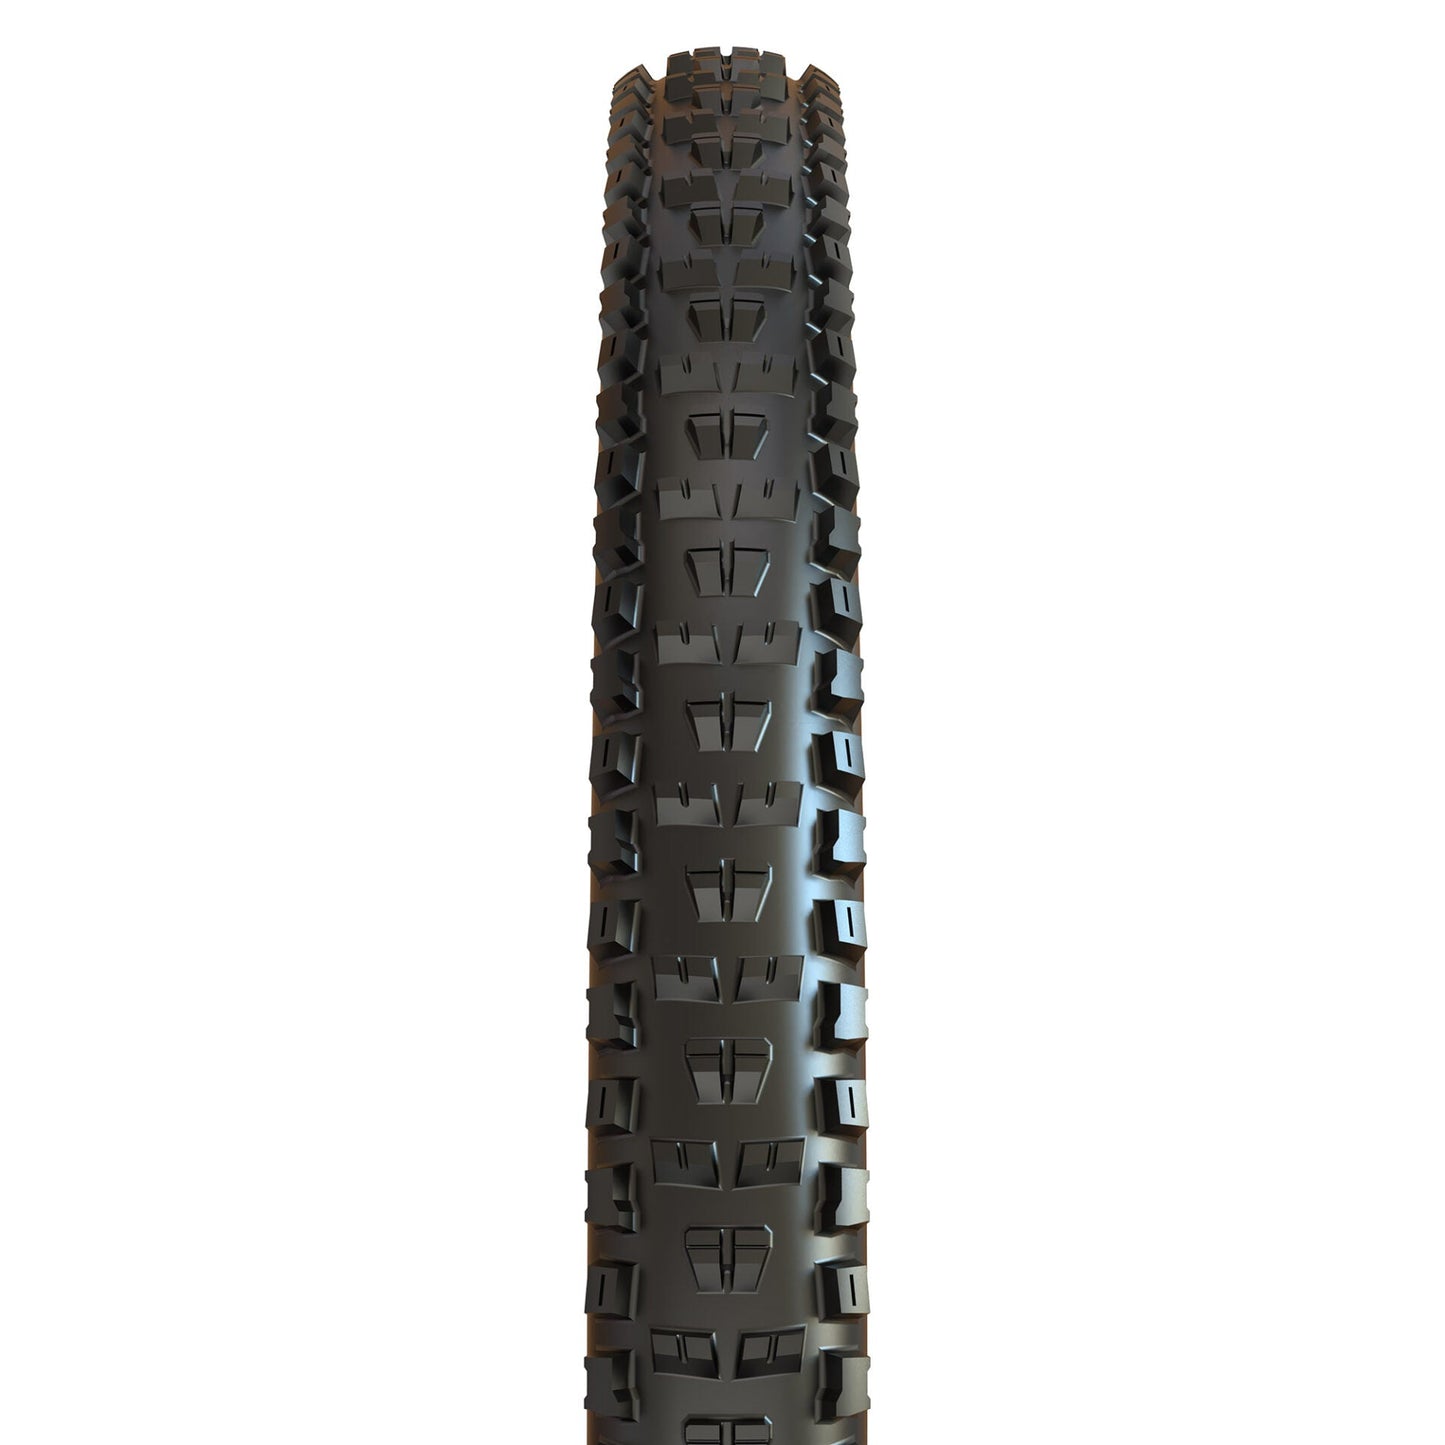 Maxxis High Roller II Exo Tubeless Ready tire 27.5x2.30 